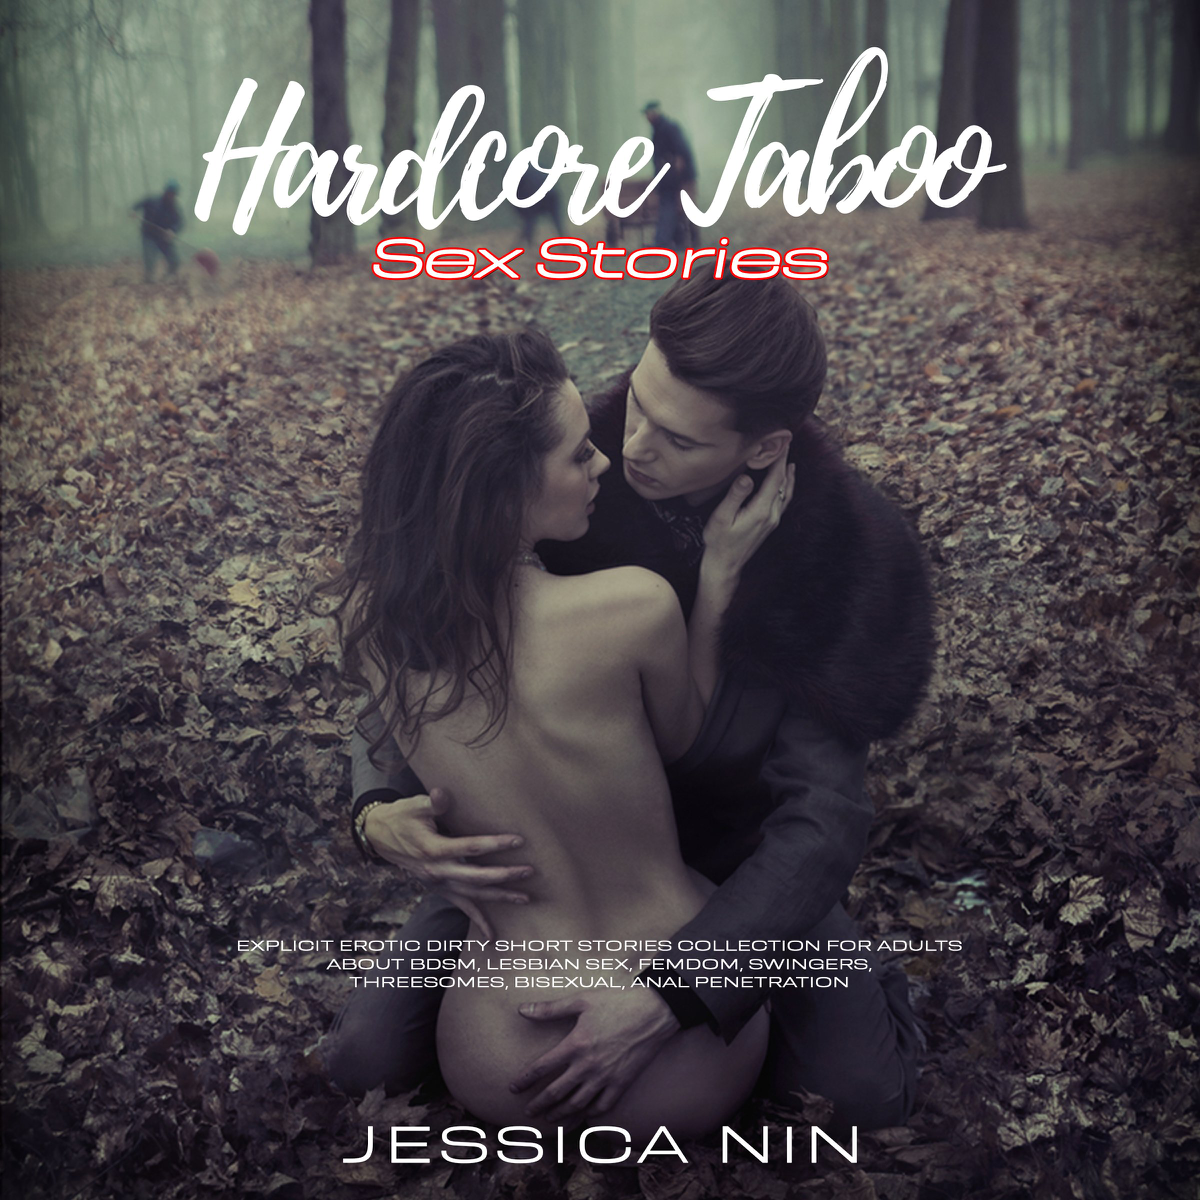 Hardcore Taboo Sex Stories Explicit Erotic Dirty Short Stories Collection For Adults About Bdsm, Lesbian sex, Femdom, Swingers, Threesomes, Bisexual, A**l Penetration - Audiobook pic image